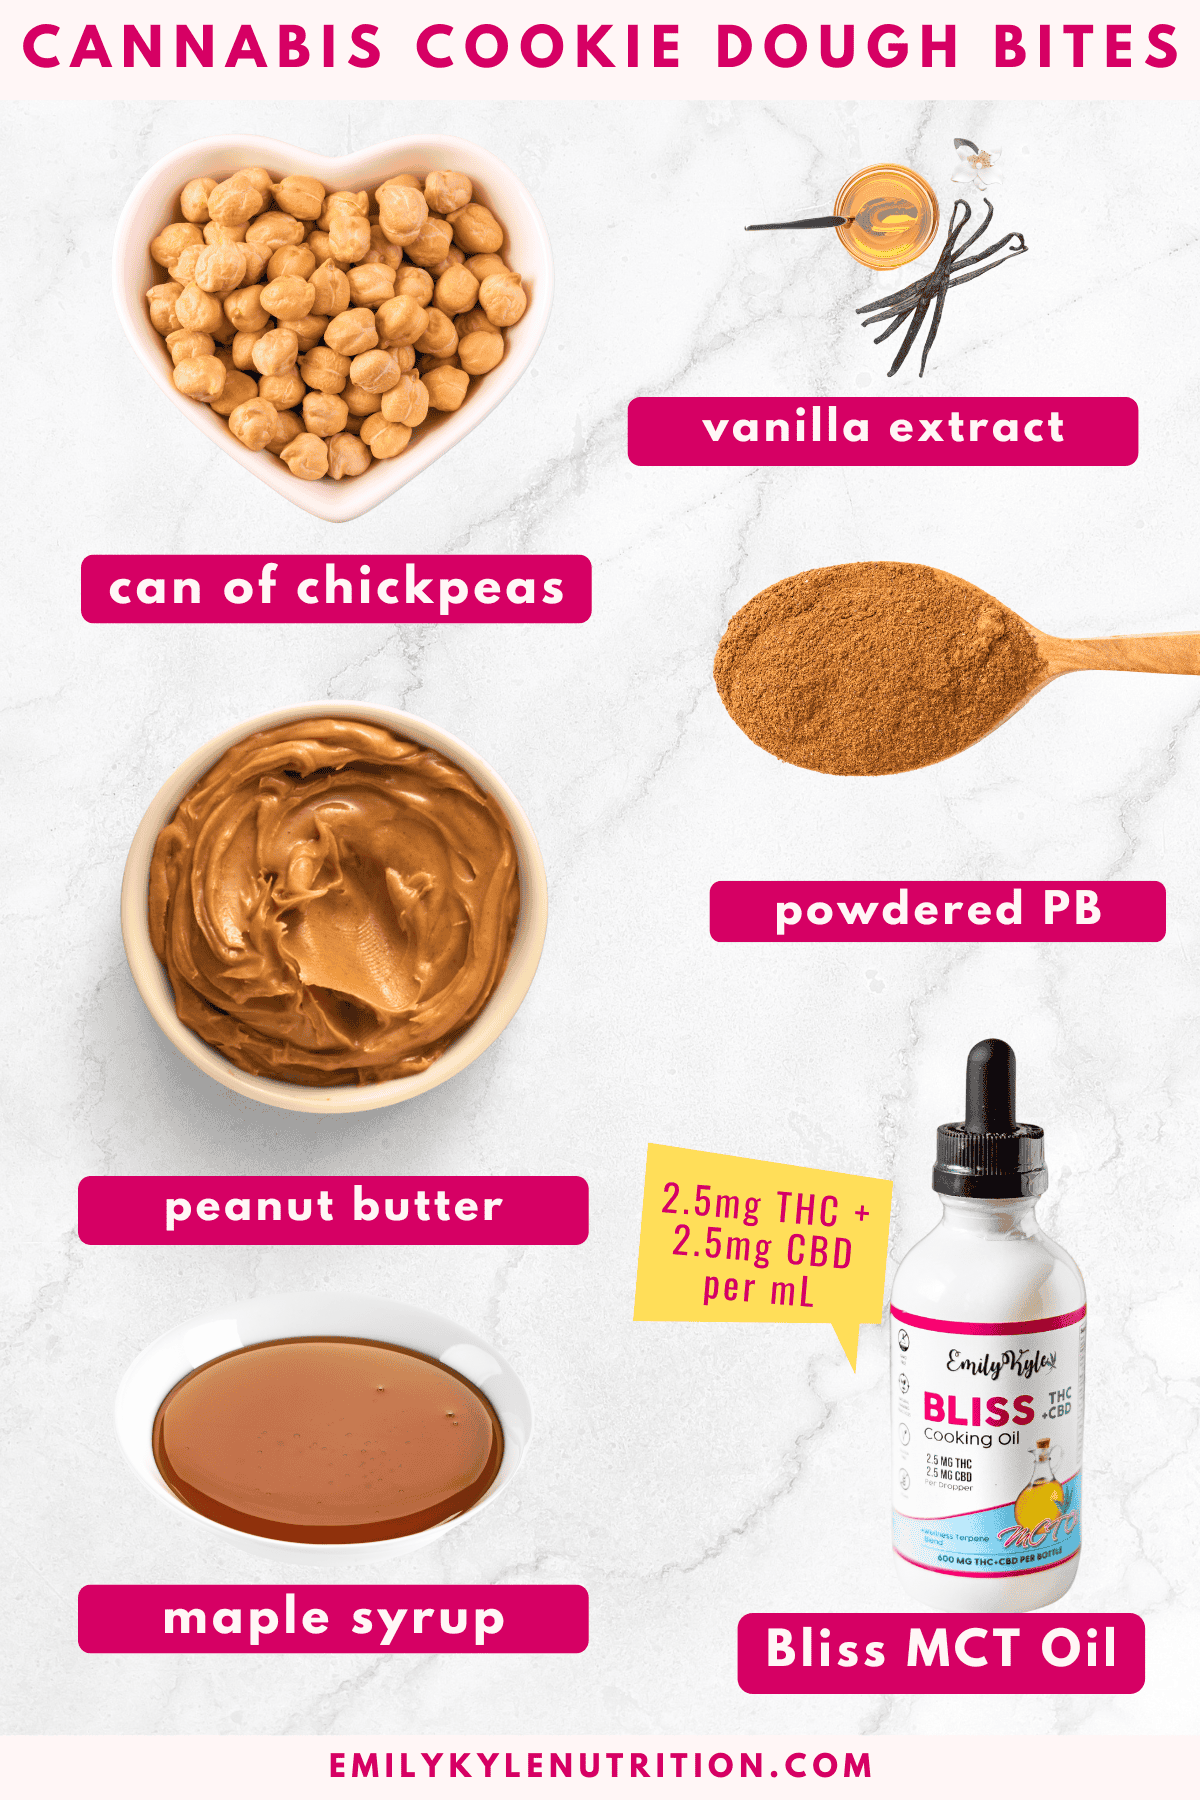 The ingredients needed to make a cannabis-infused cookie dough bite. 